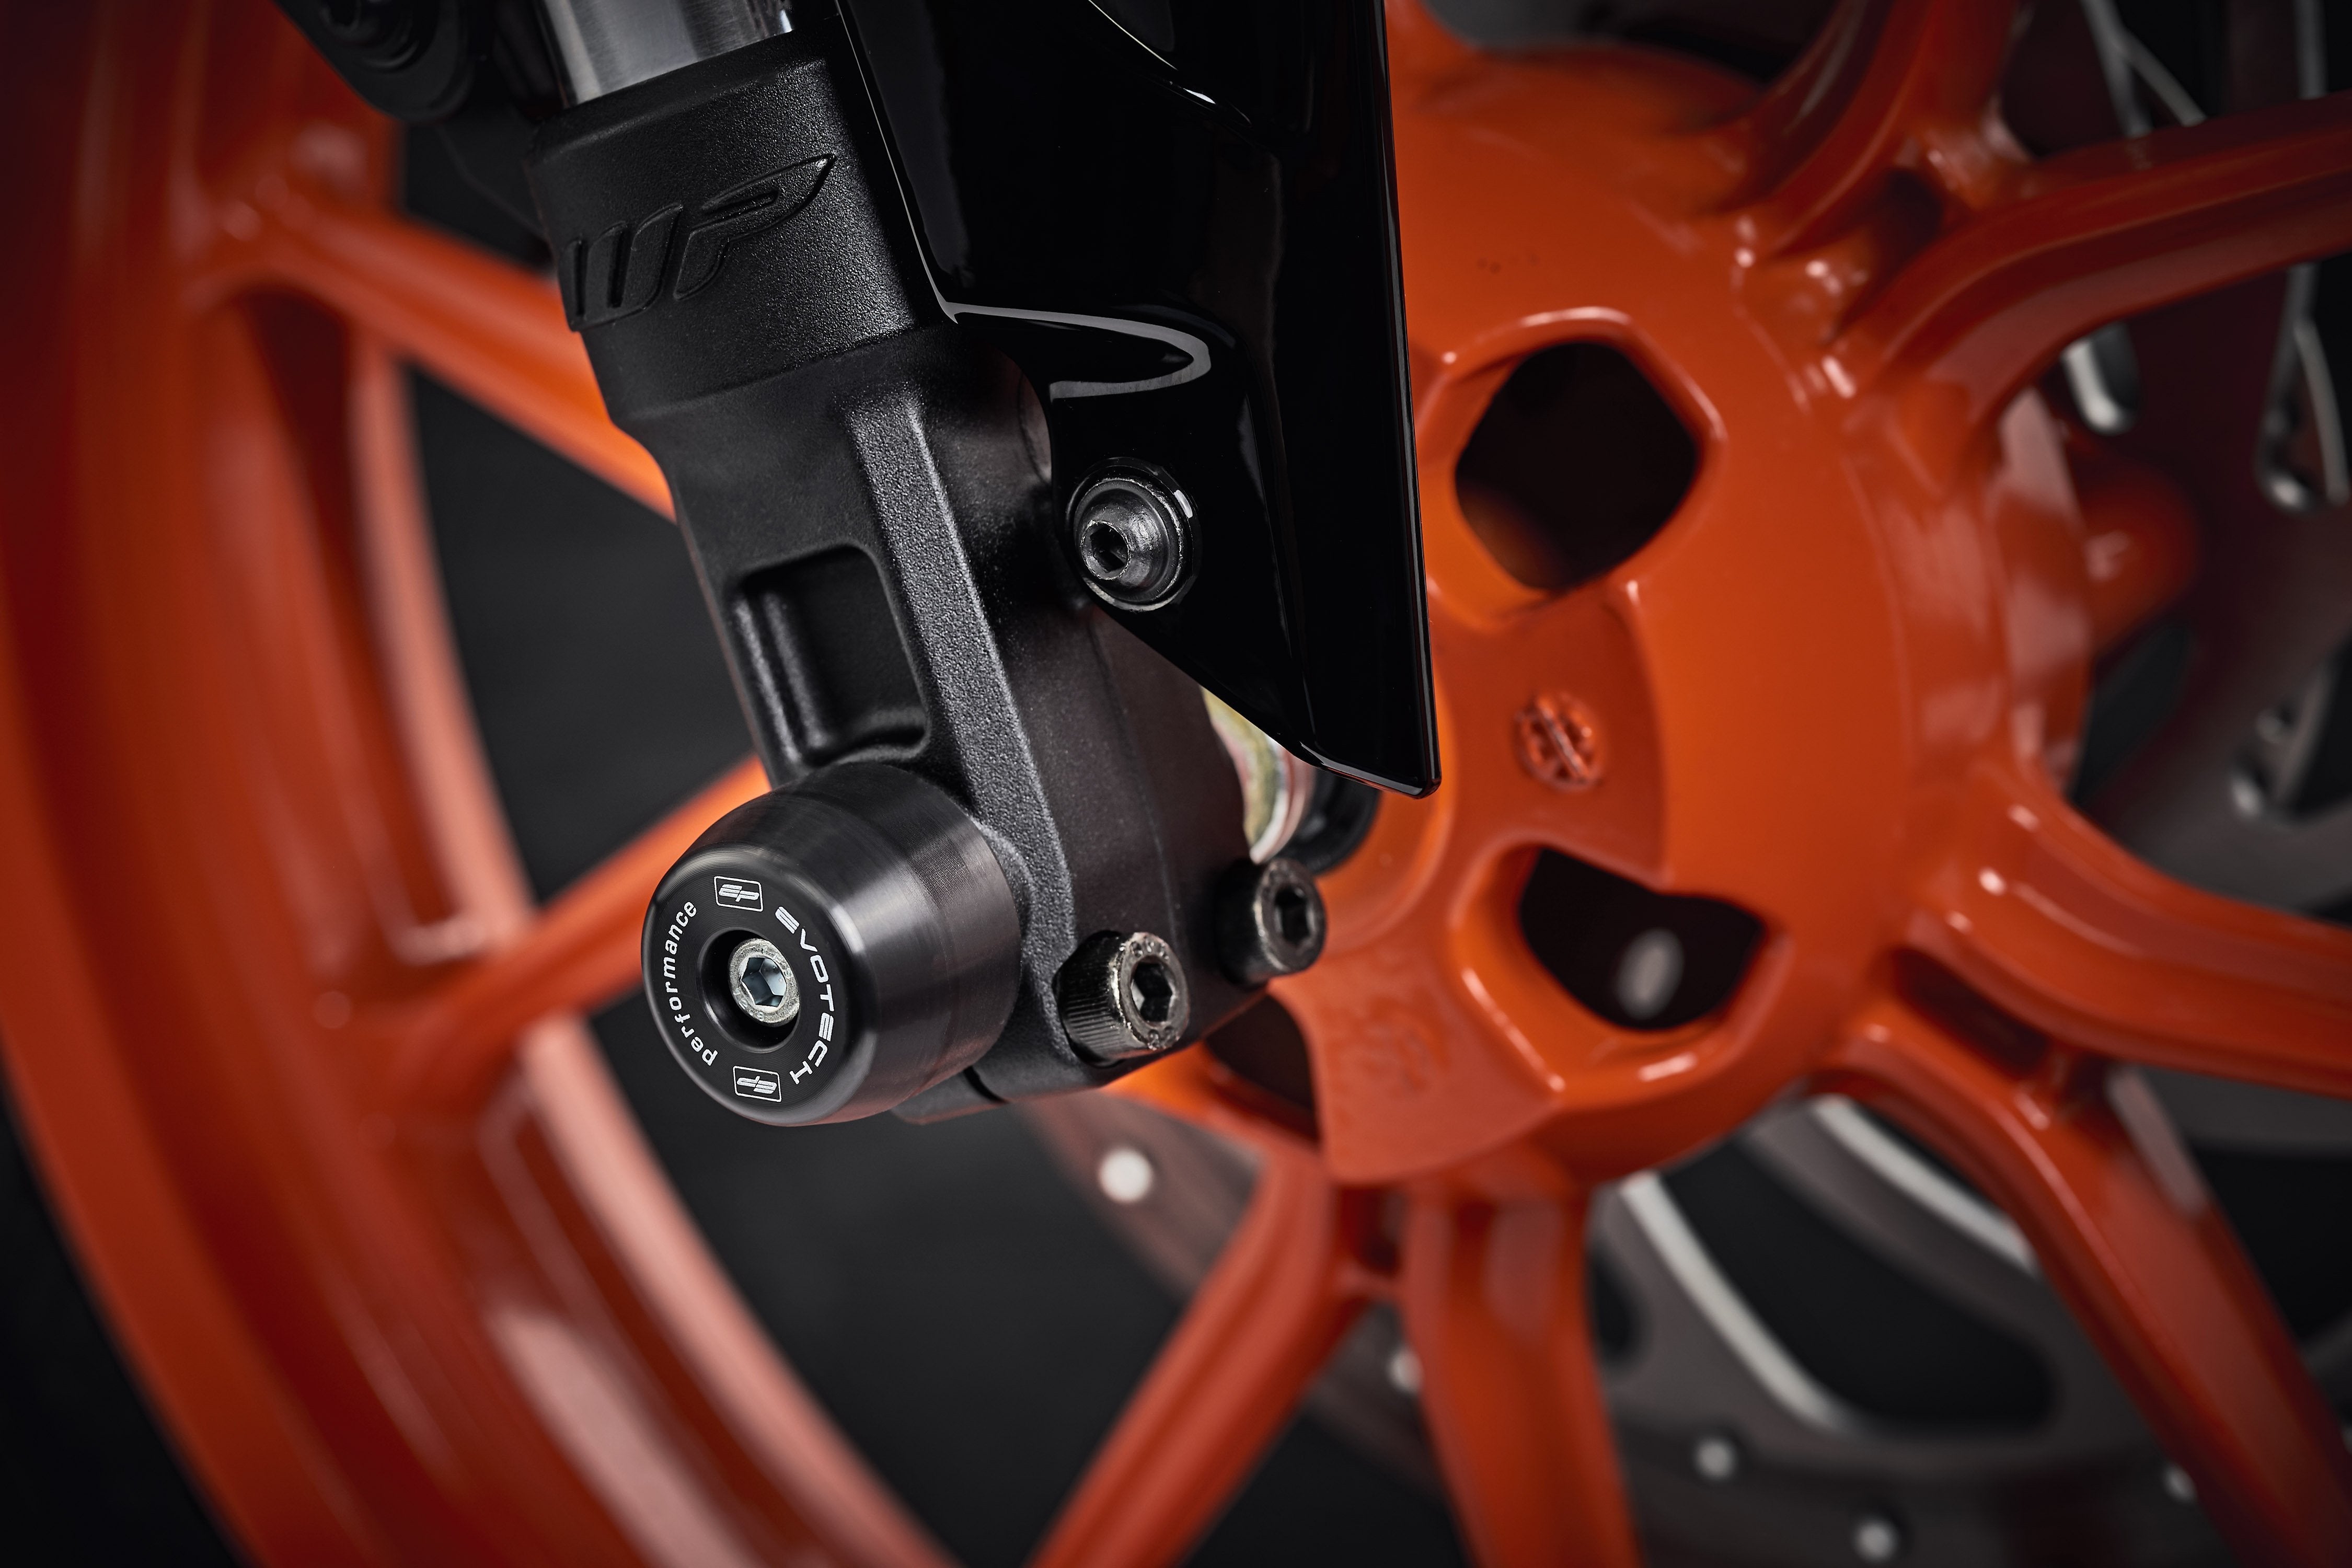 The lower front fork of the KTM 390 Duke with EP Front Spindle Bobbins securely attached, offering crash protection to the motorcycleâs front wheel.